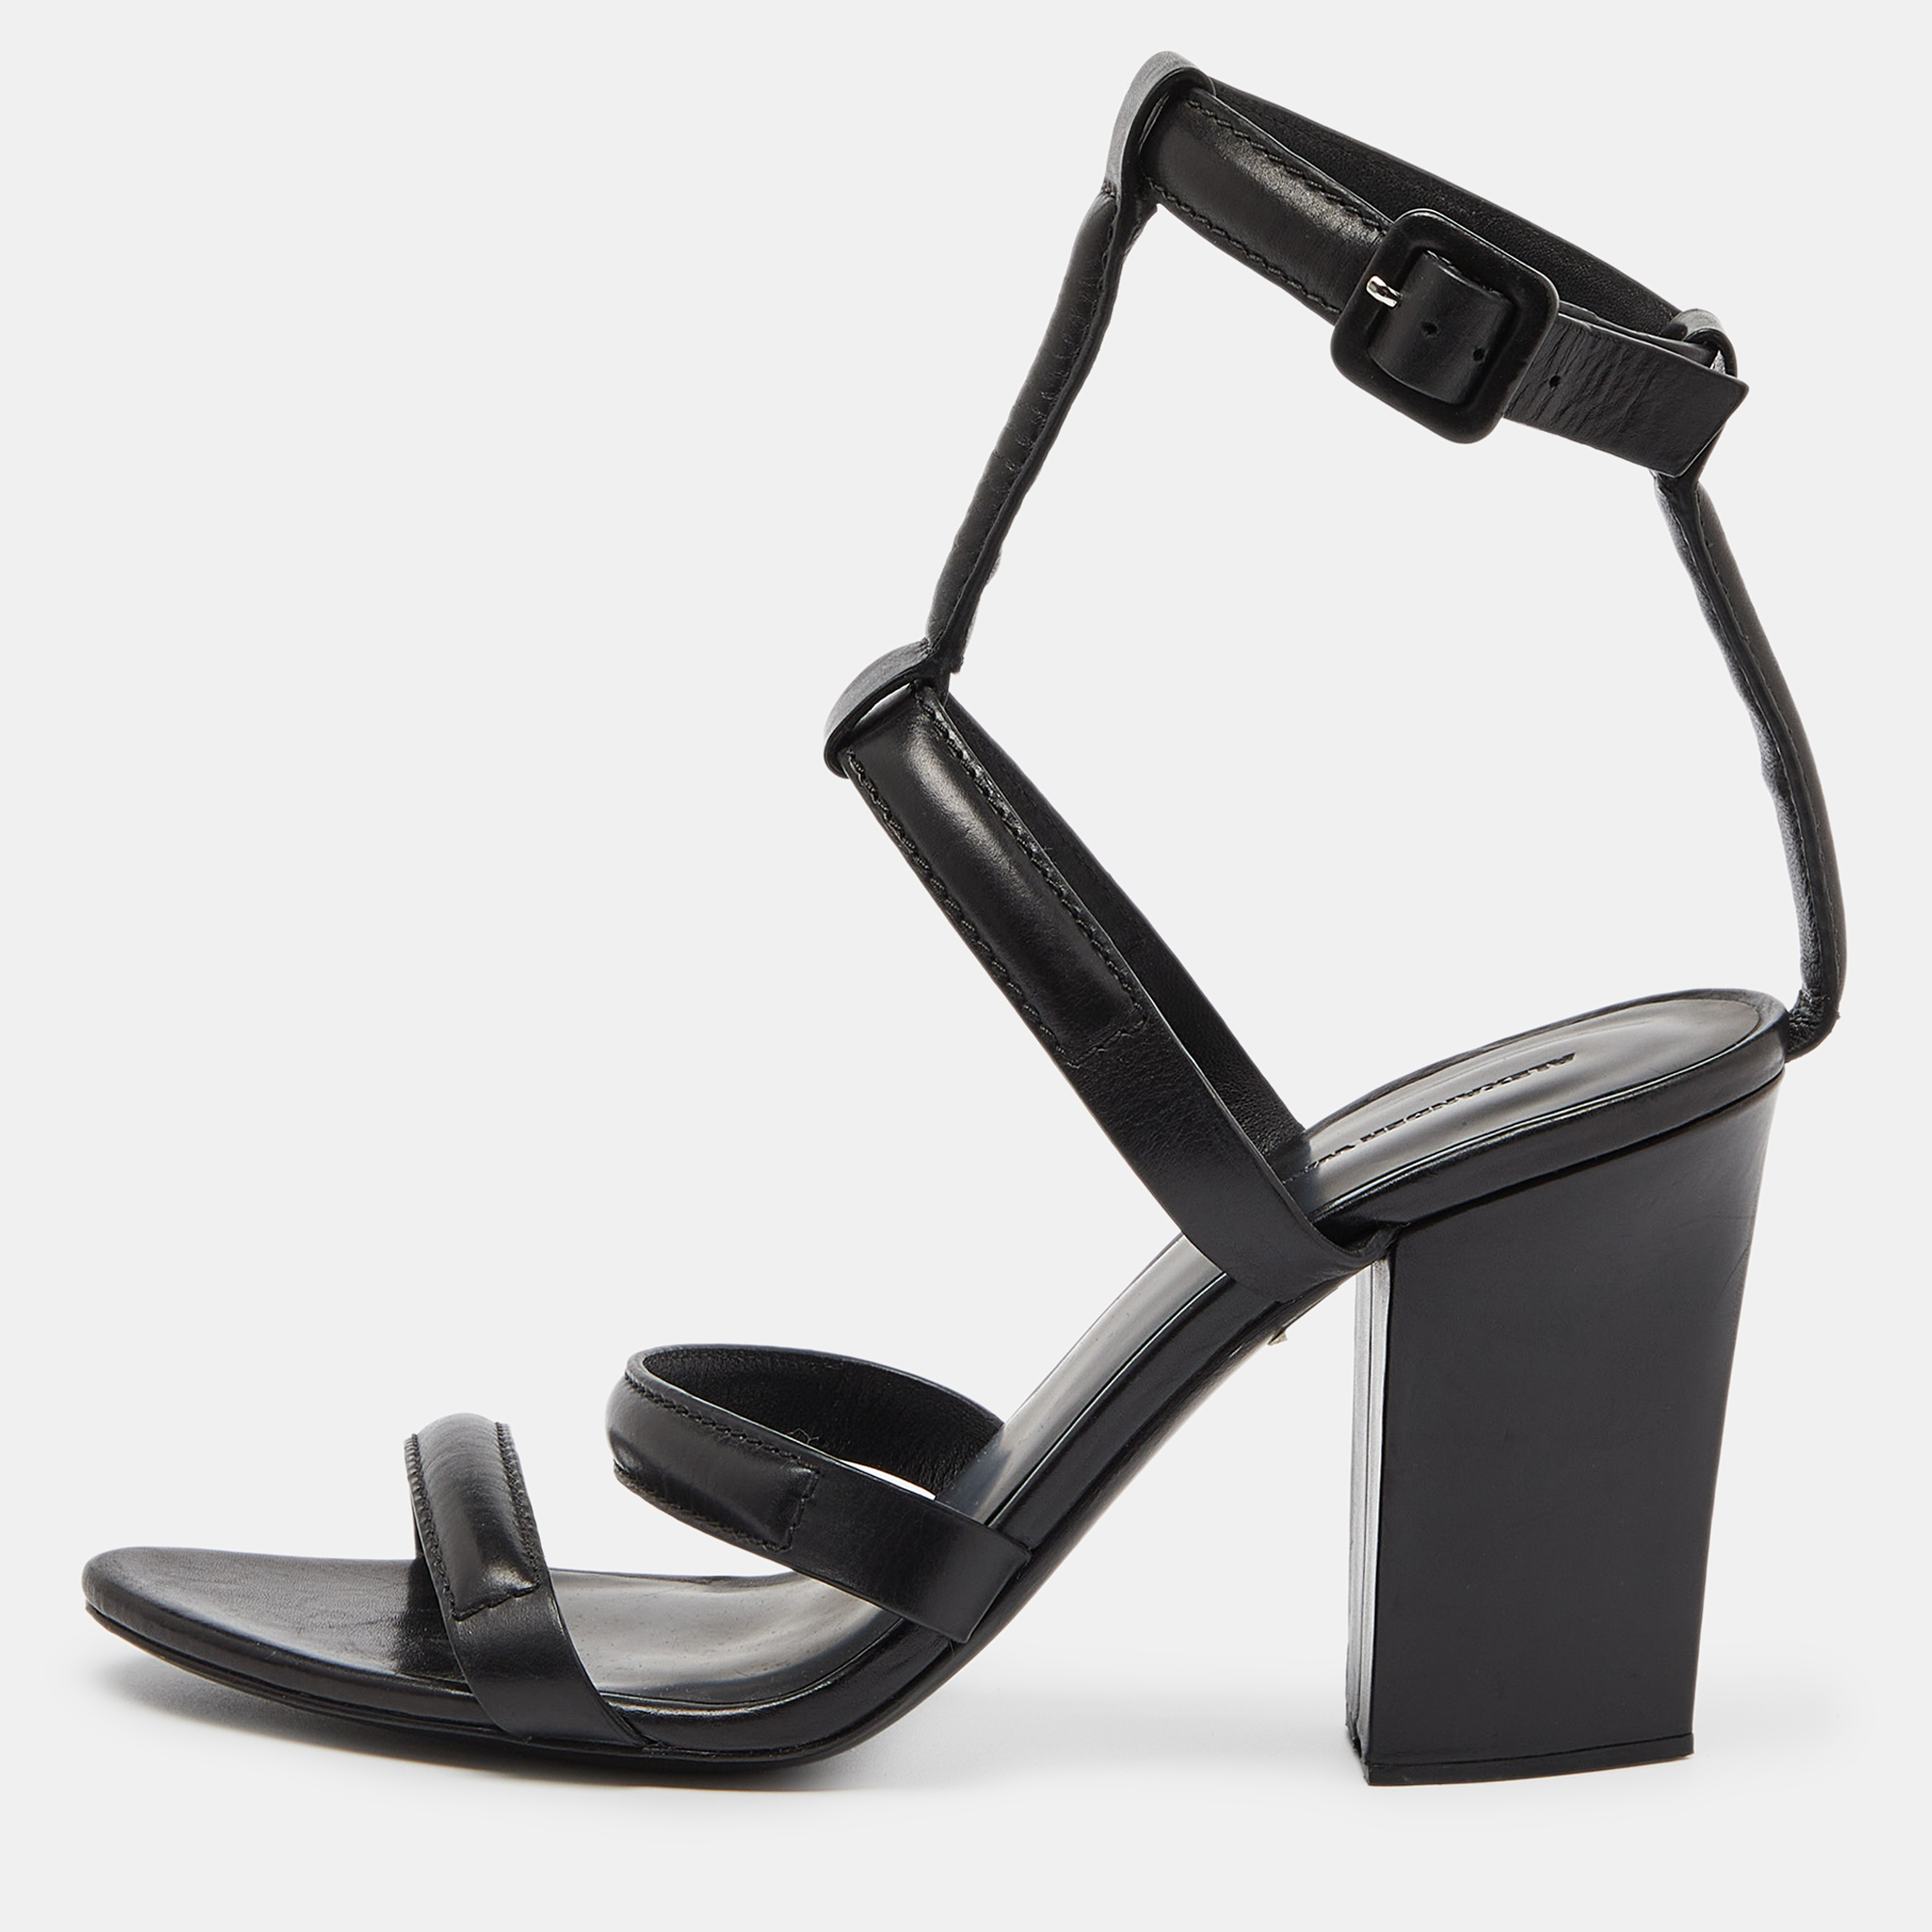 Alexander wang black leather ankle-strap sandals size 39.5